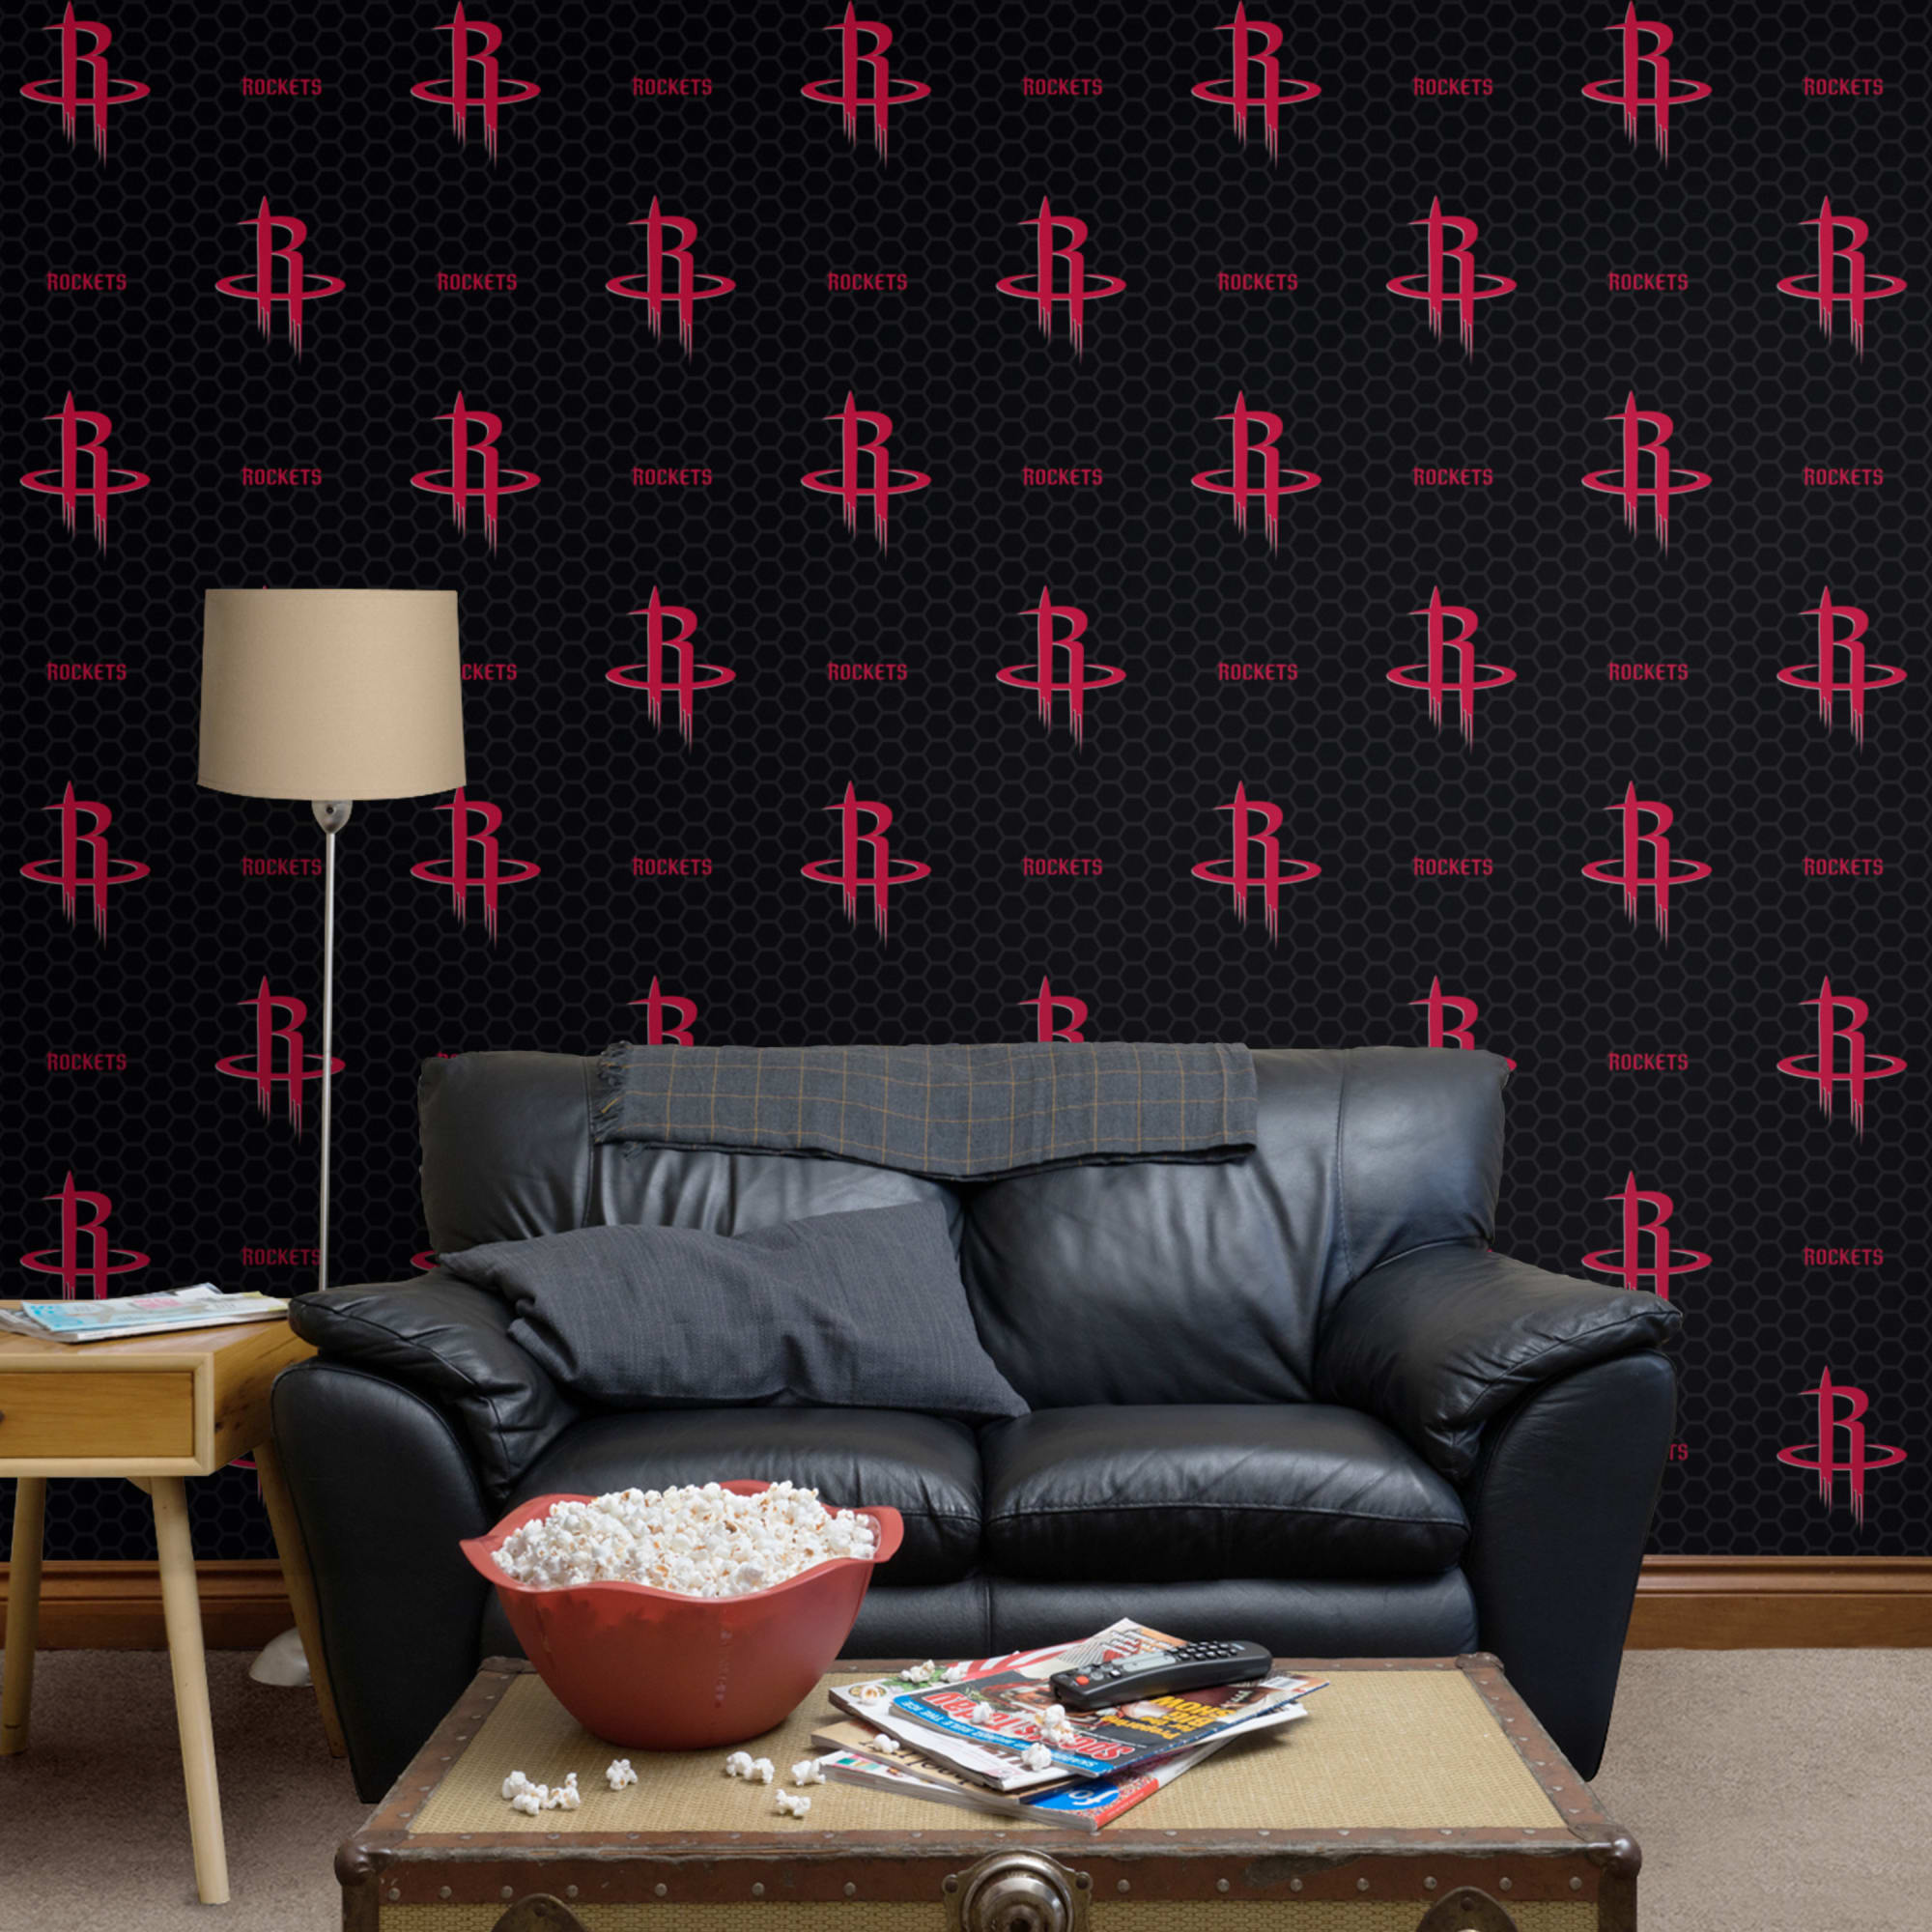 Houston Rockets: Logo Pattern - Officially Licensed Removable Wallpaper 12" x 12" Sample by Fathead